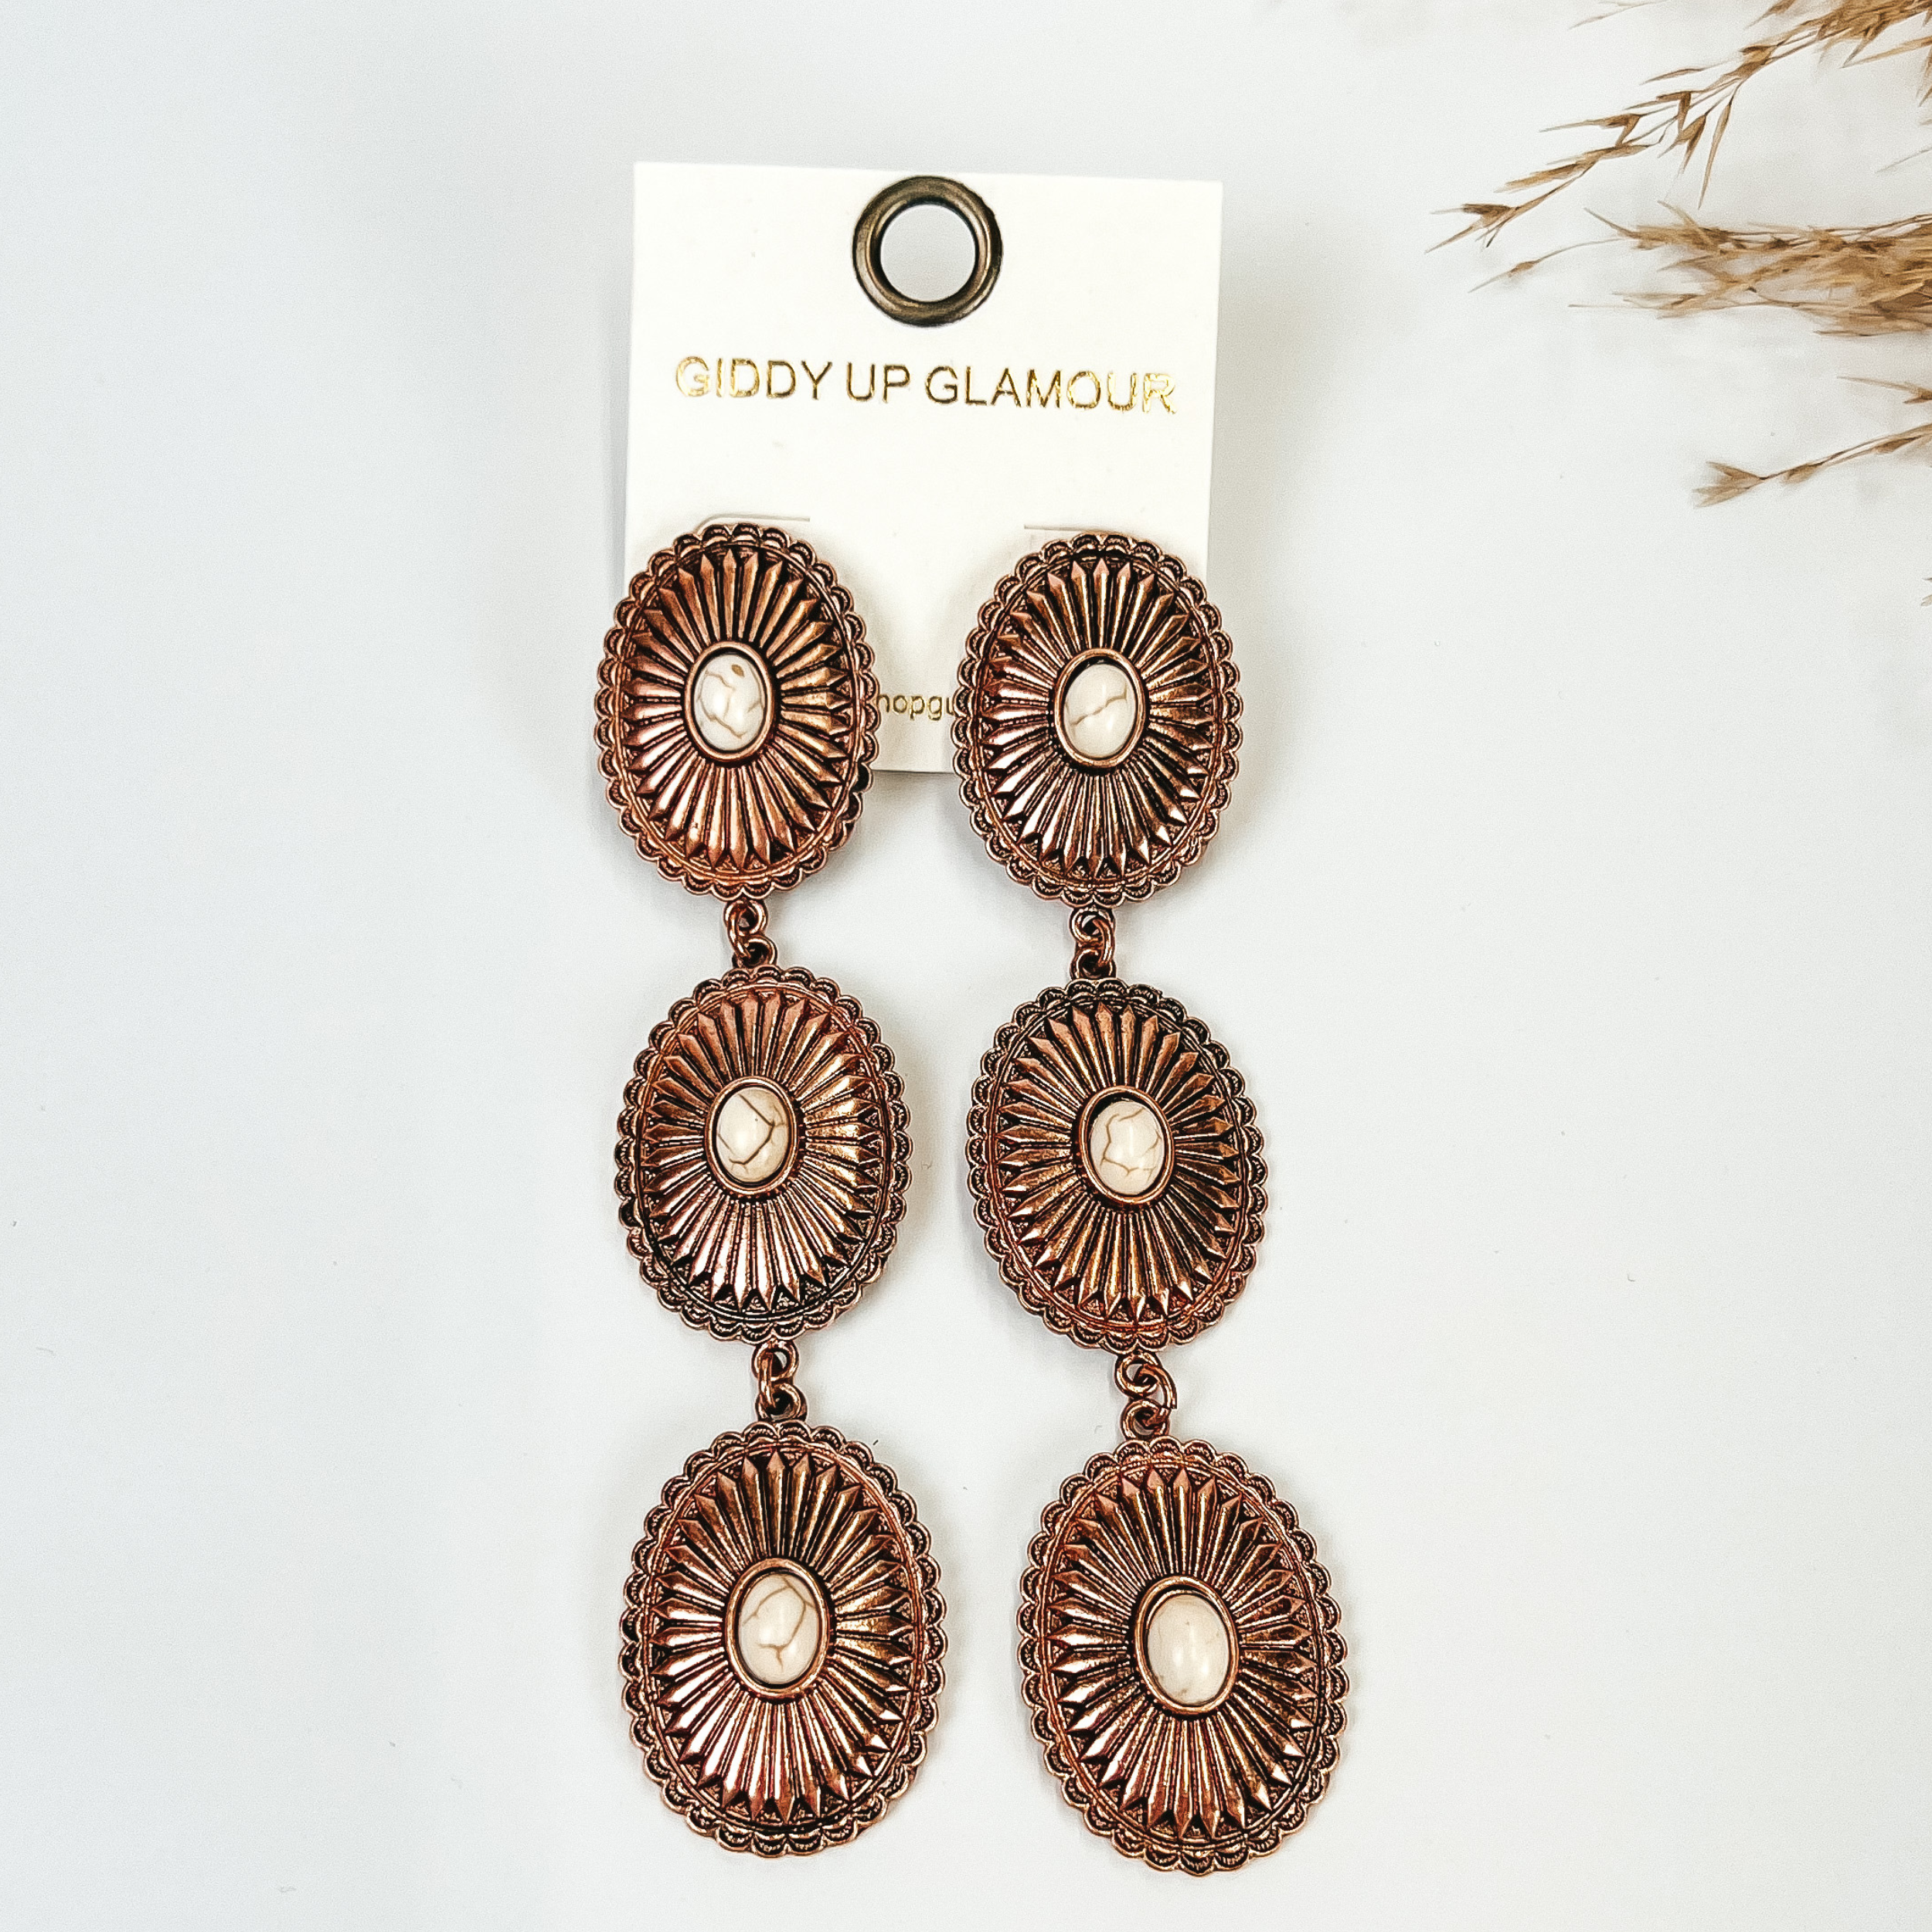 Concho Drop Earrings with White Stones in Copper Tone, with pompous grass in the top right hand corner, on a white background. 